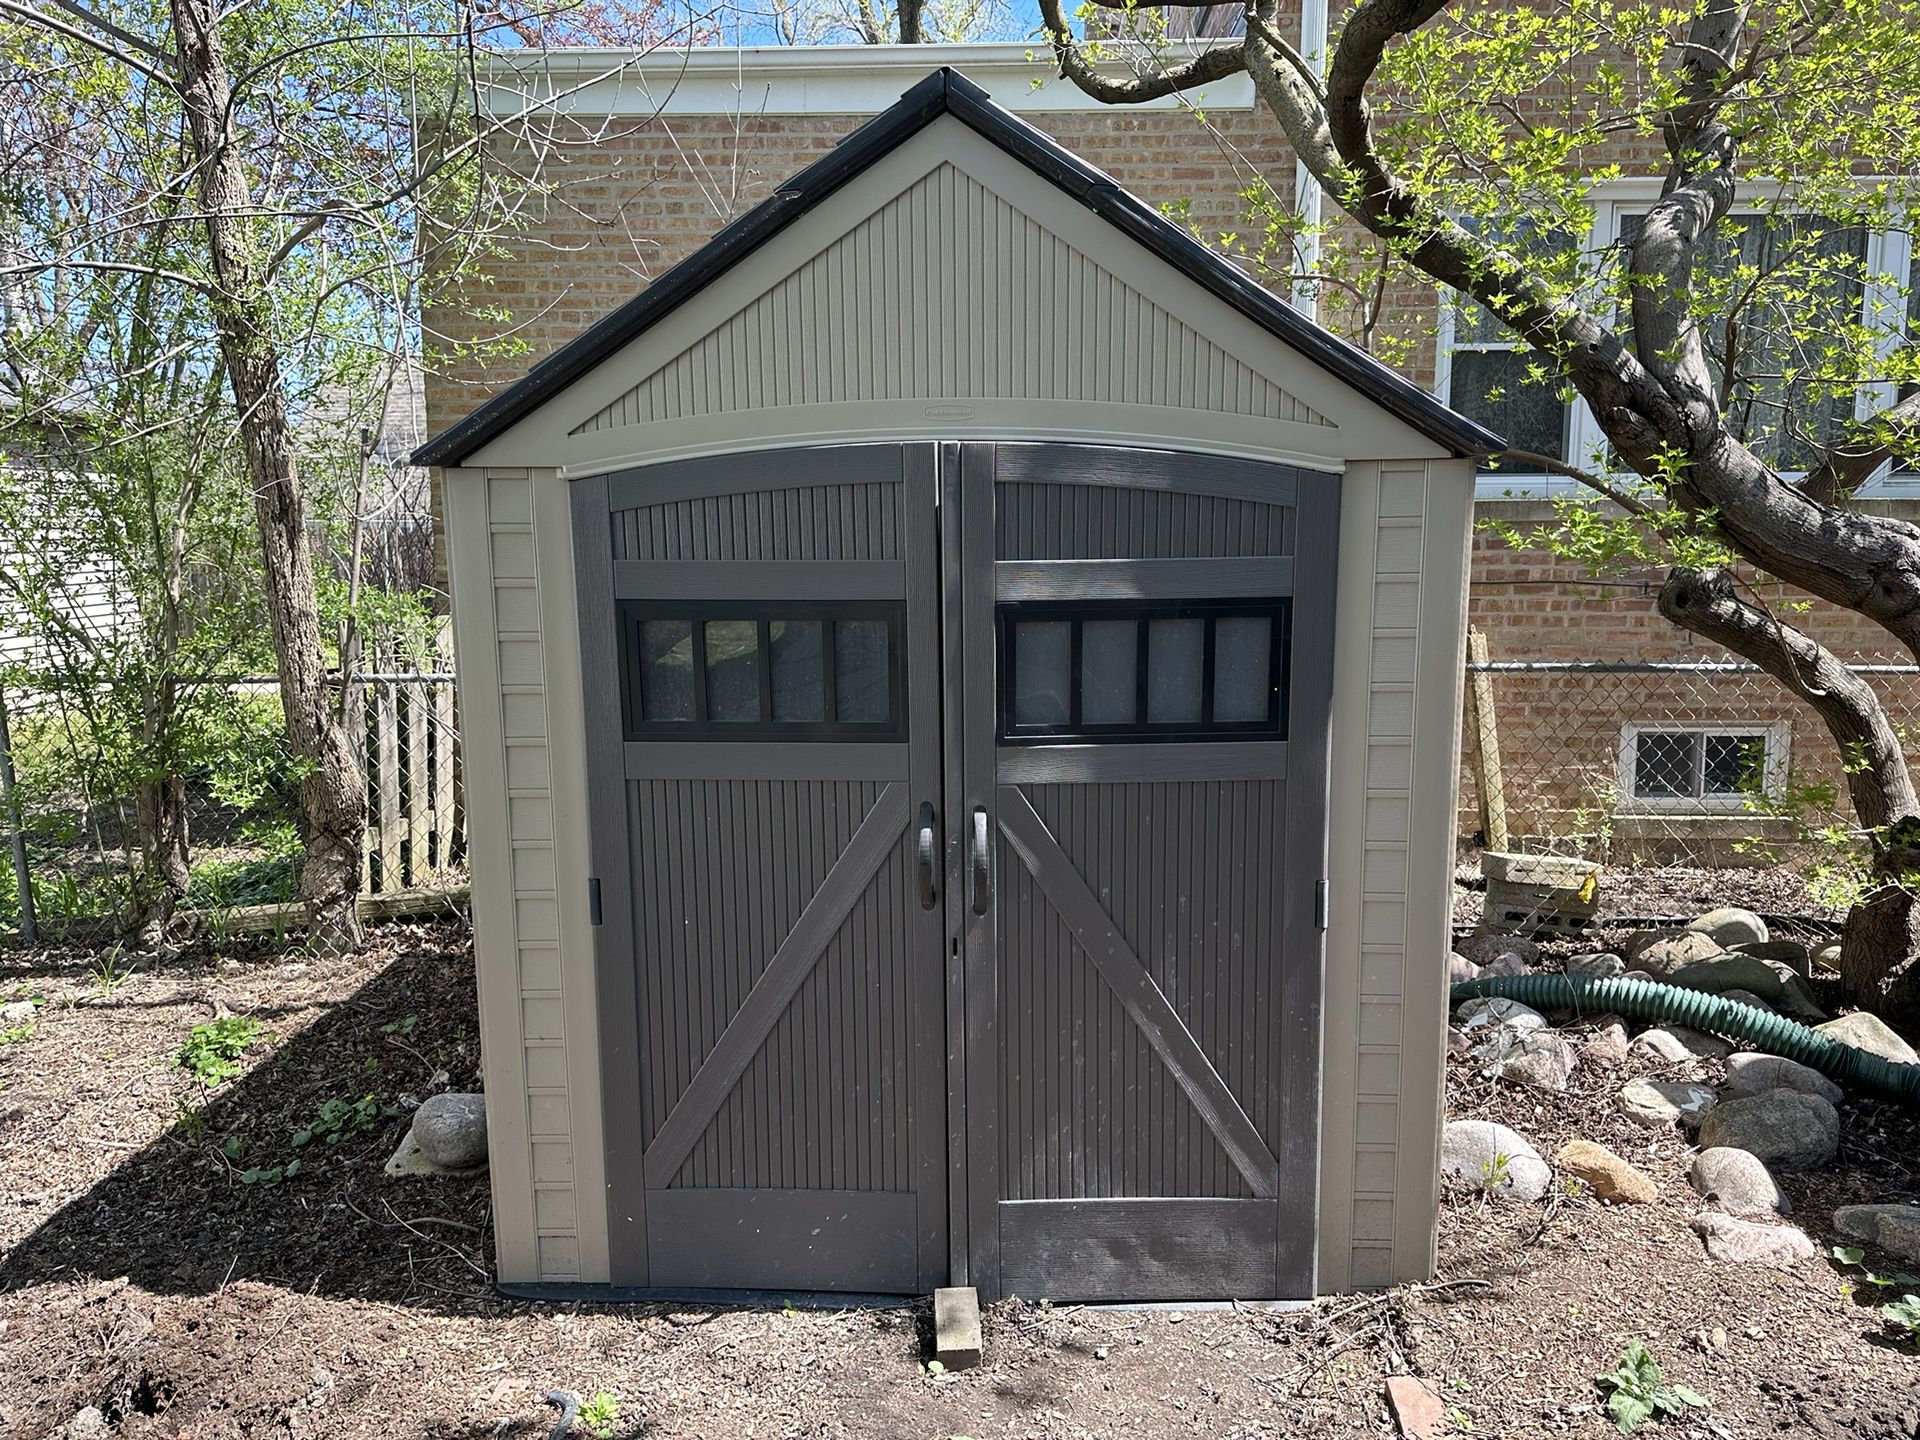 Rubbermaid Roughneck 7 ft. x 7 ft. Storage Shed